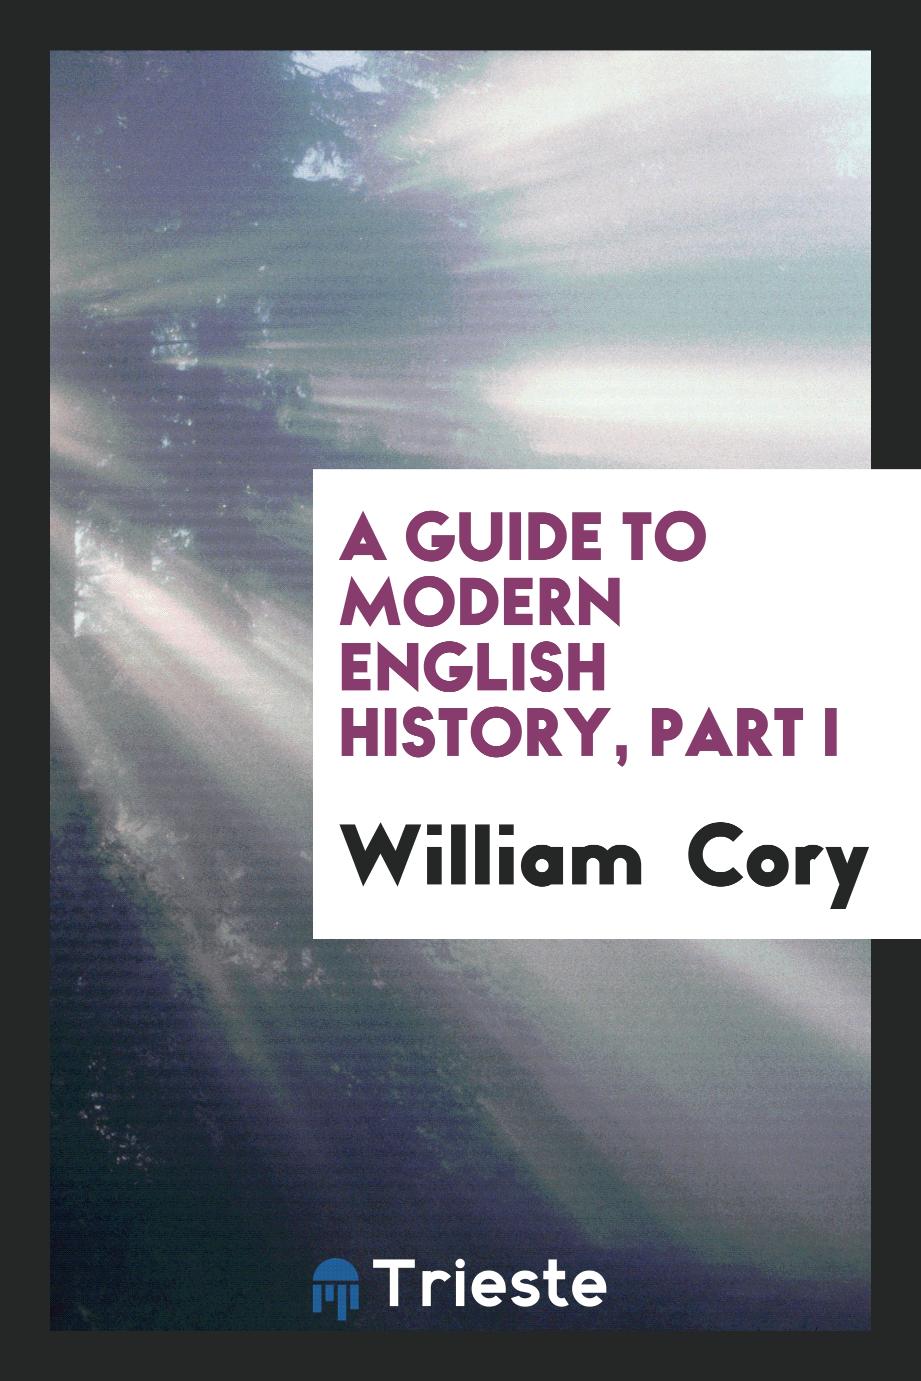 A guide to modern English history, Part I